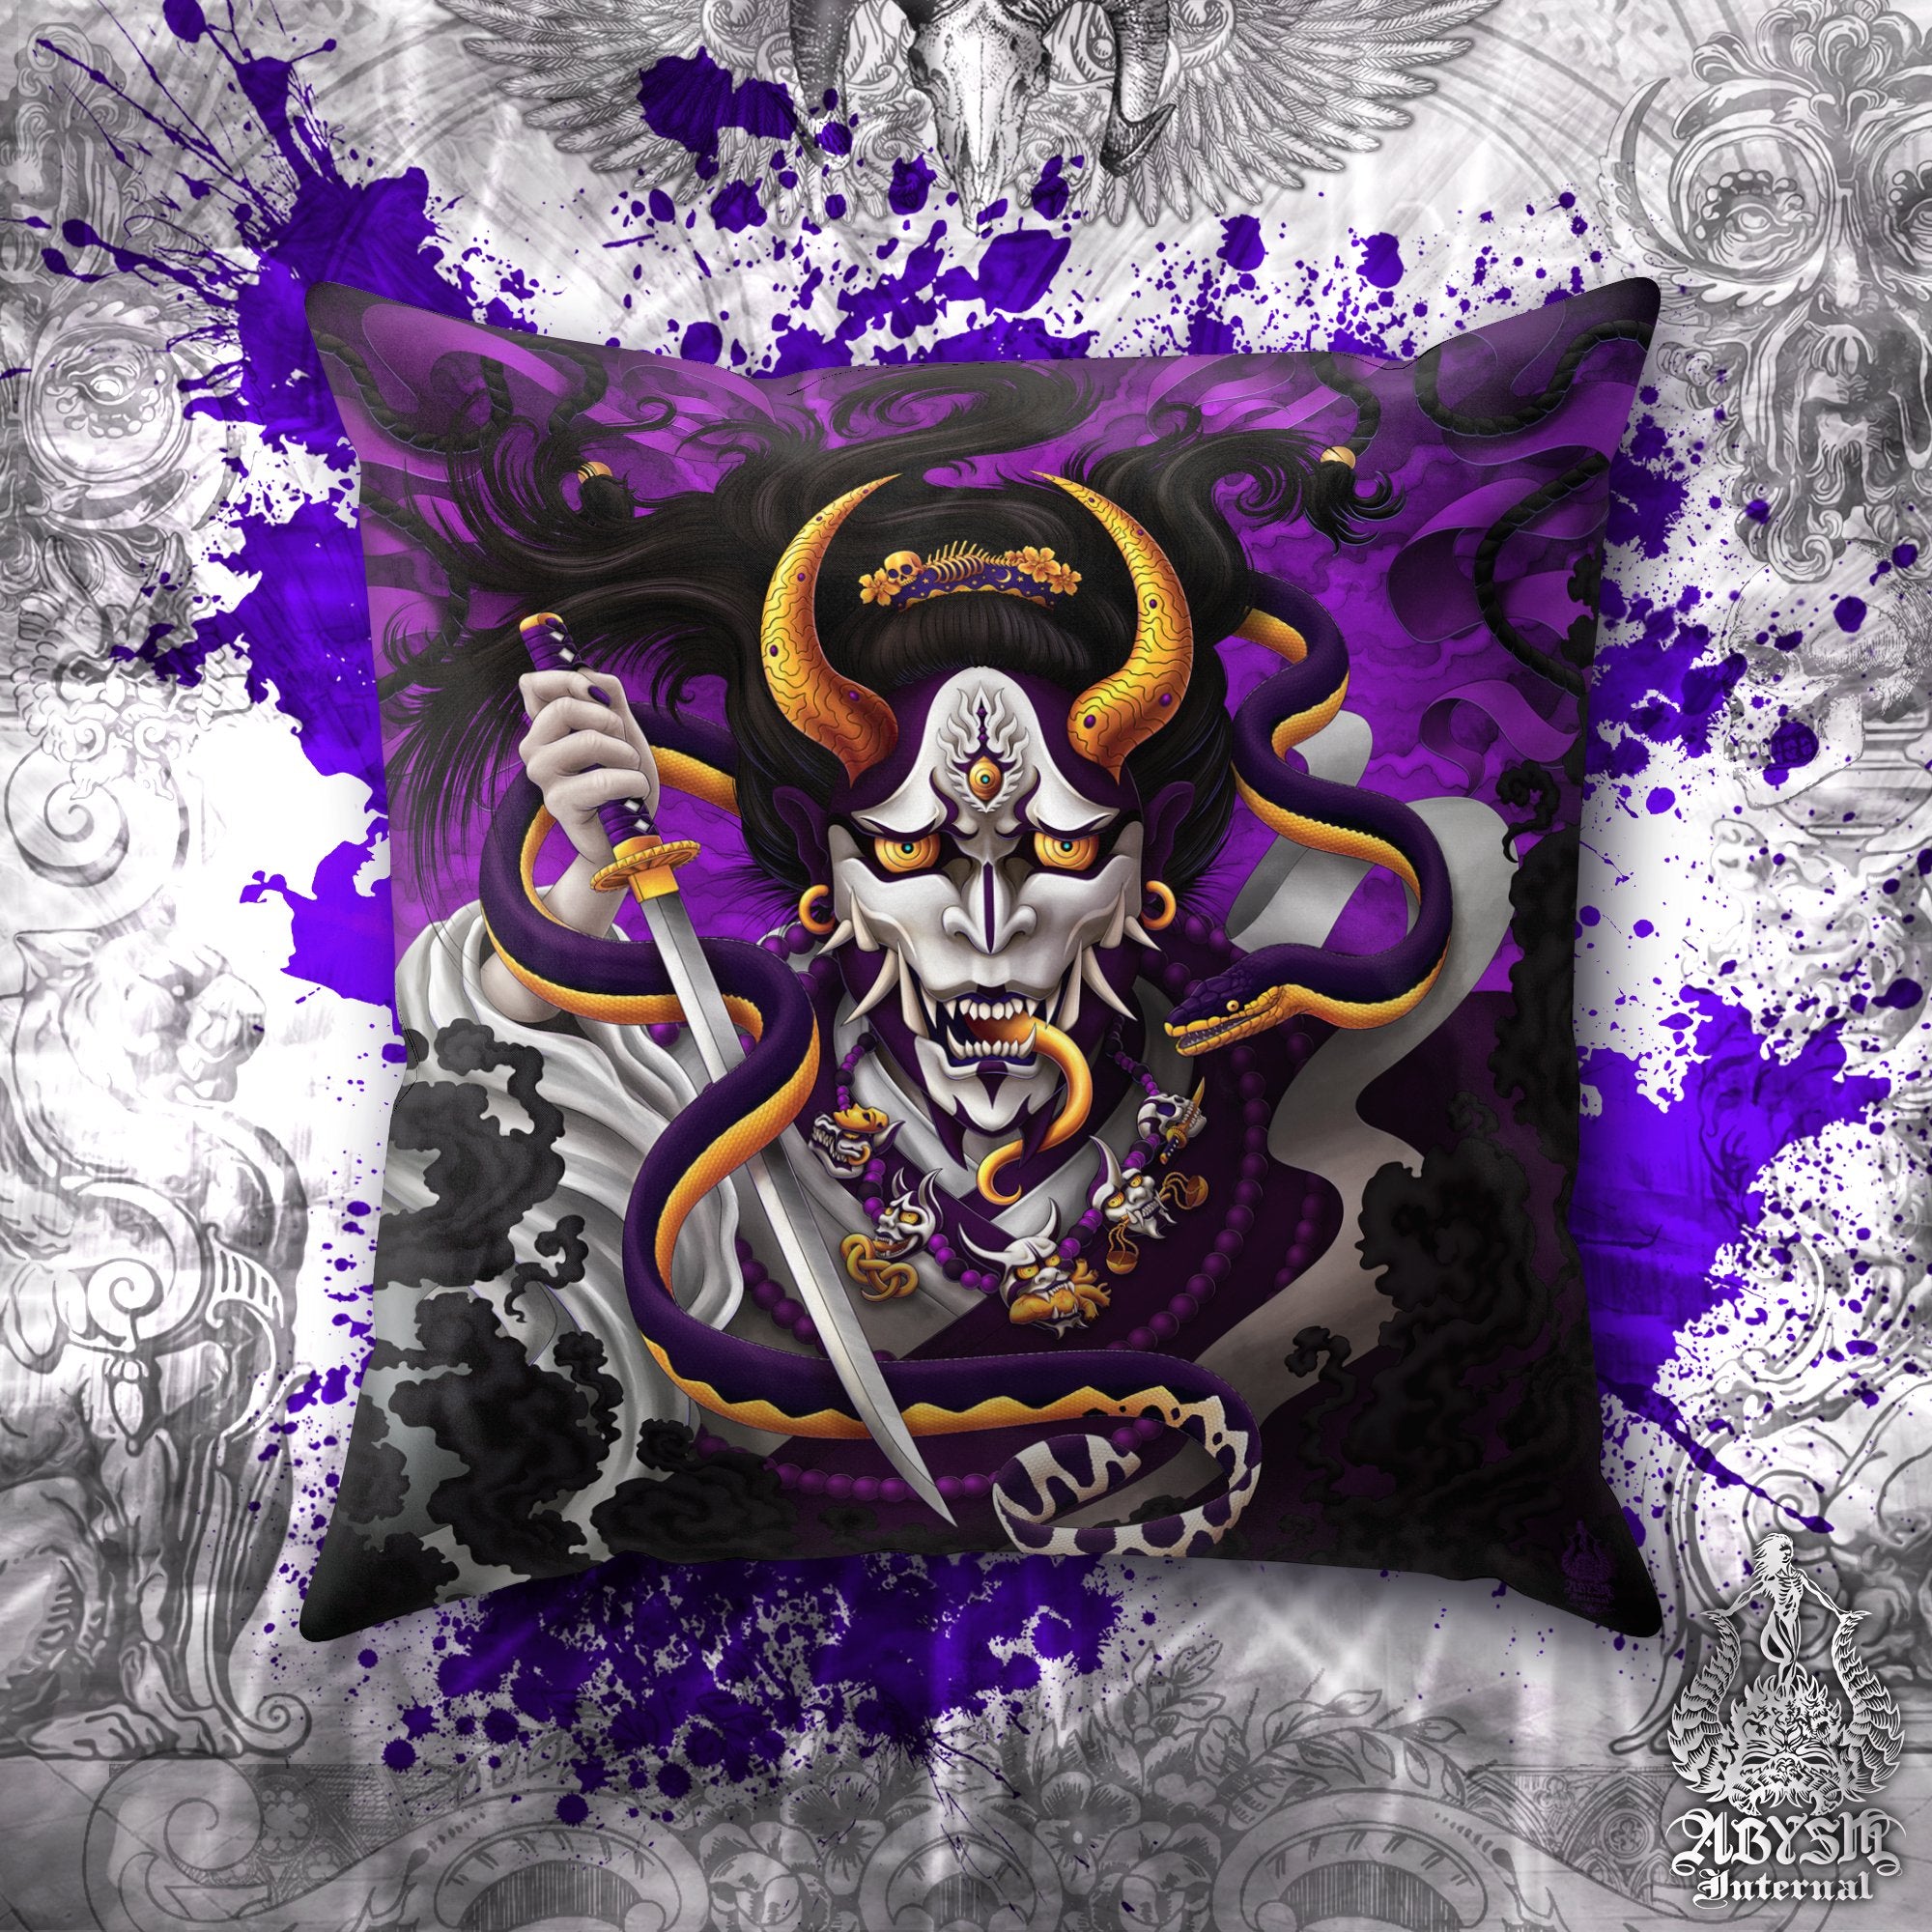 White Goth Throw Pillow, Decorative Accent Pillow, Square Cushion Cover, Purple Hannya, Japanese Demon & Snake, Anime Room Decor - Abysm Internal